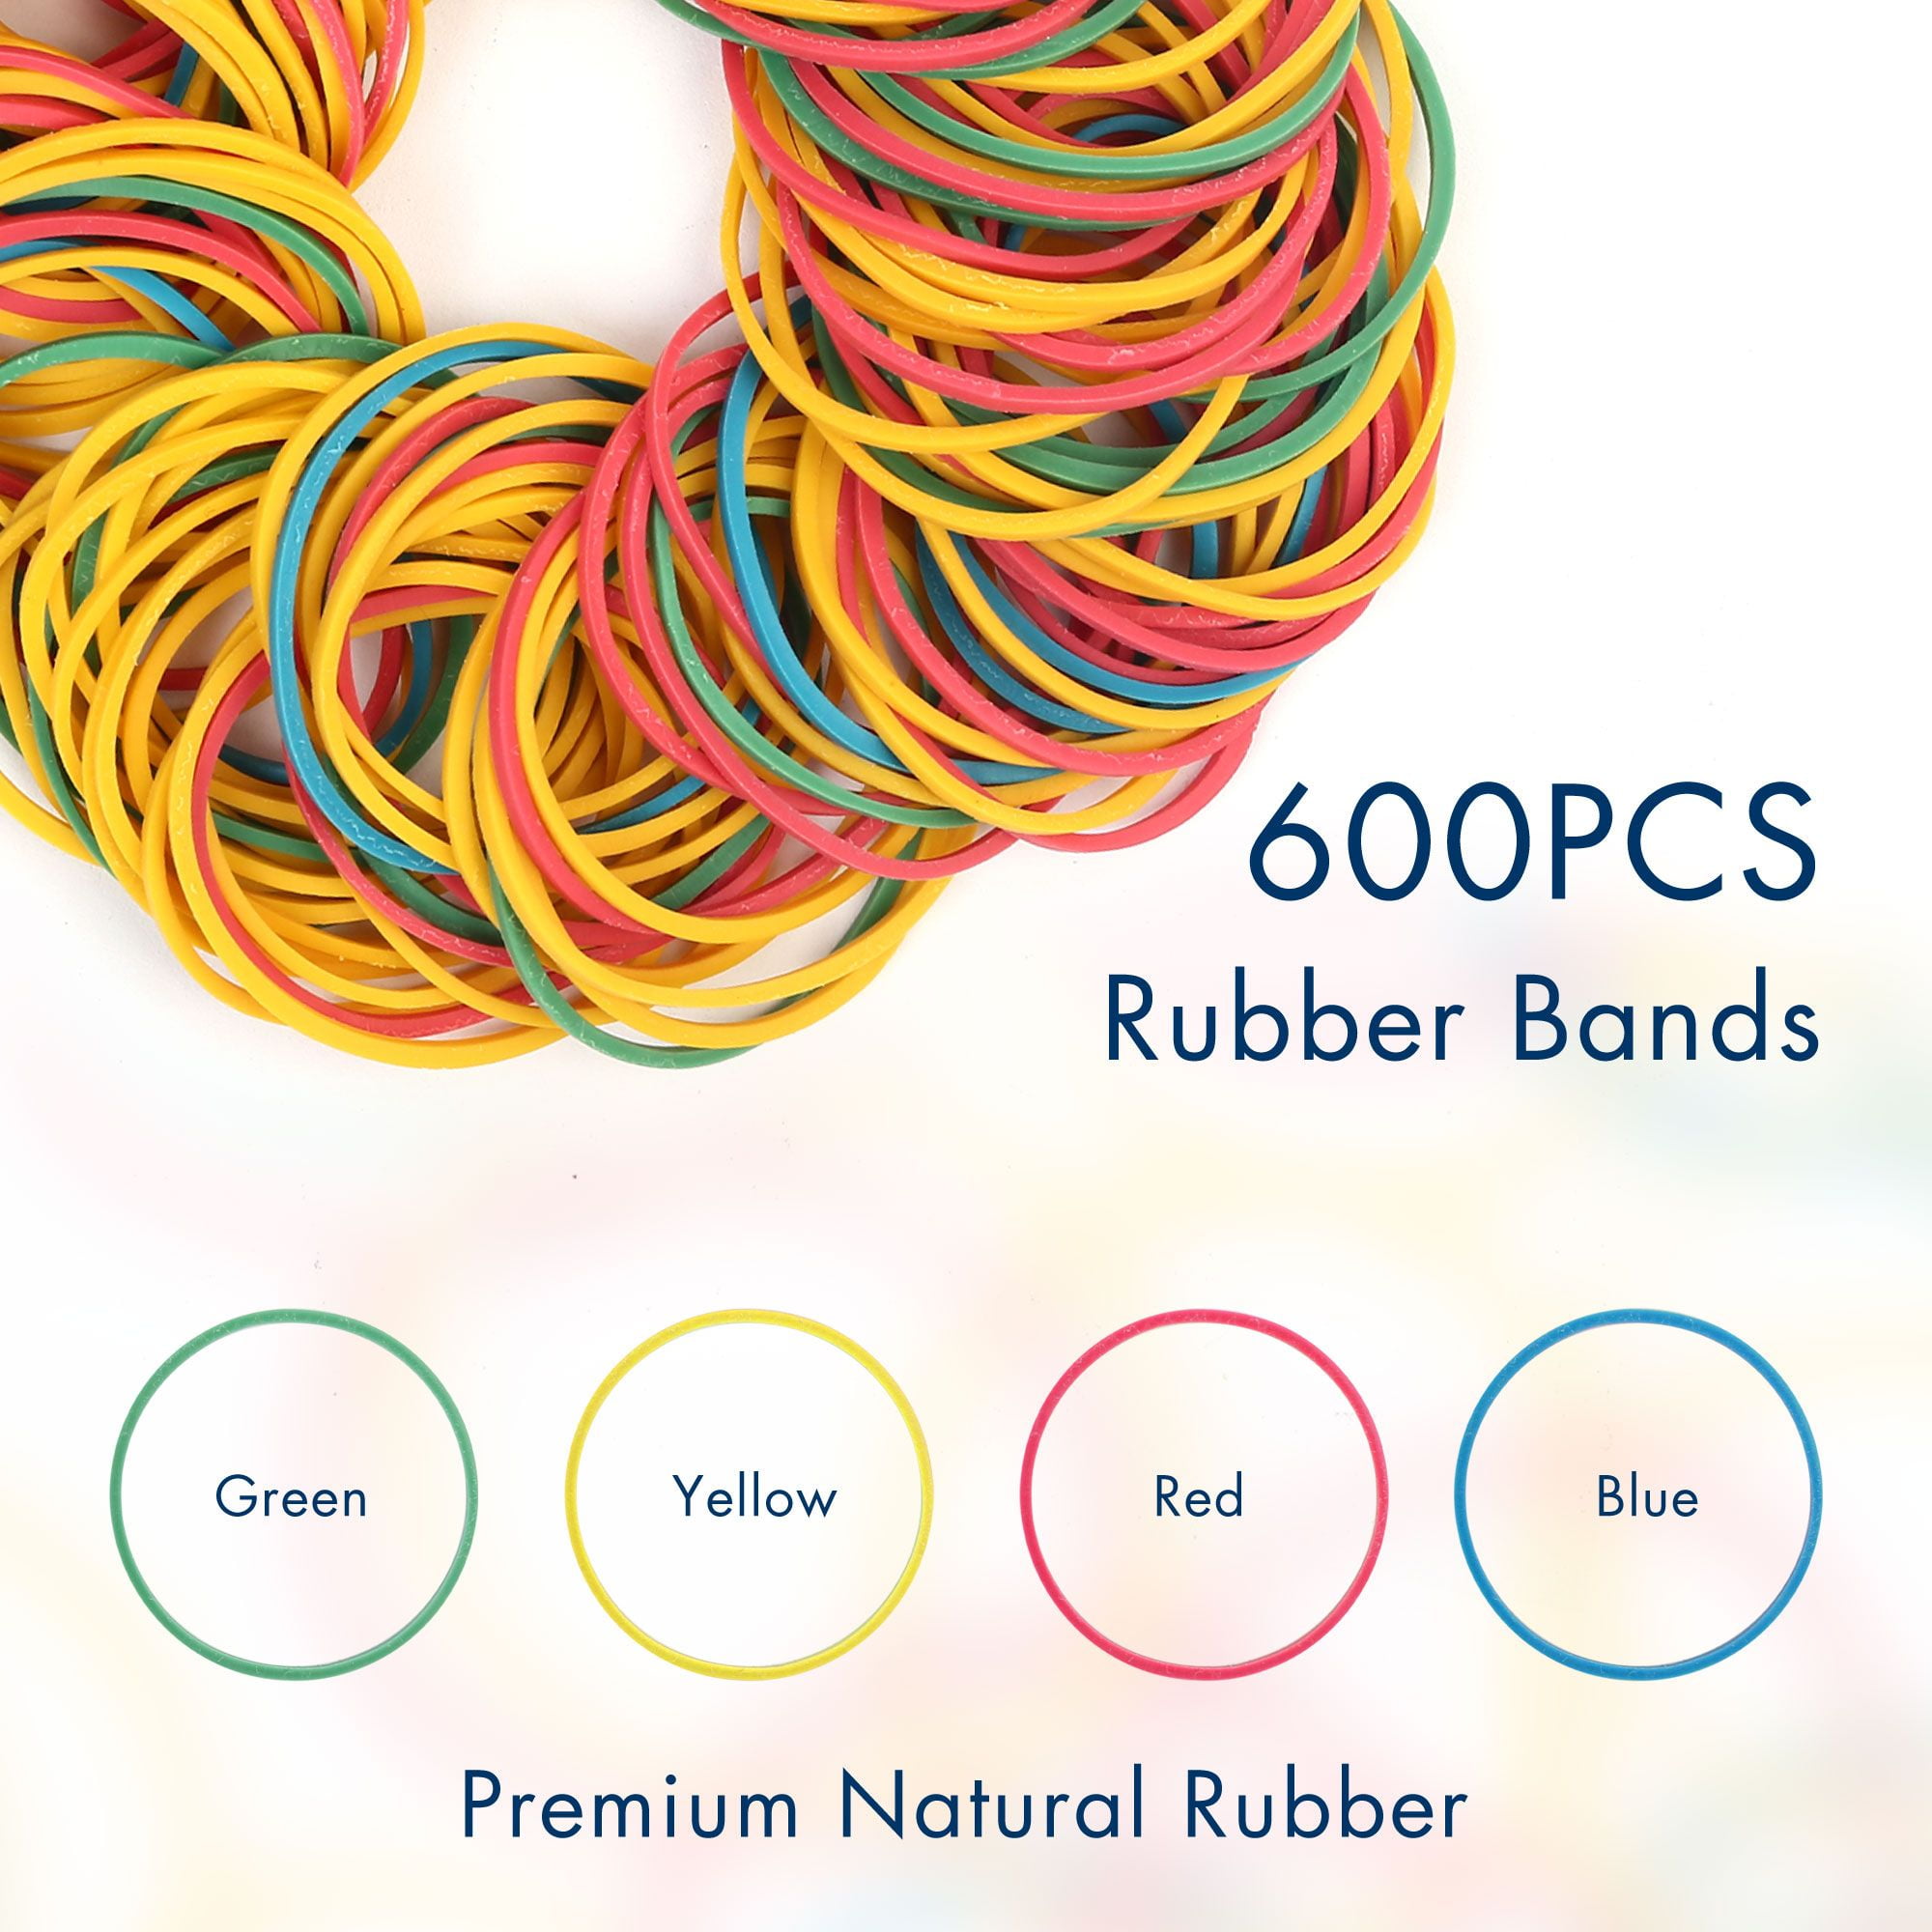 Colored rubber bands background Stock Photo by ©spaxiax 3183109